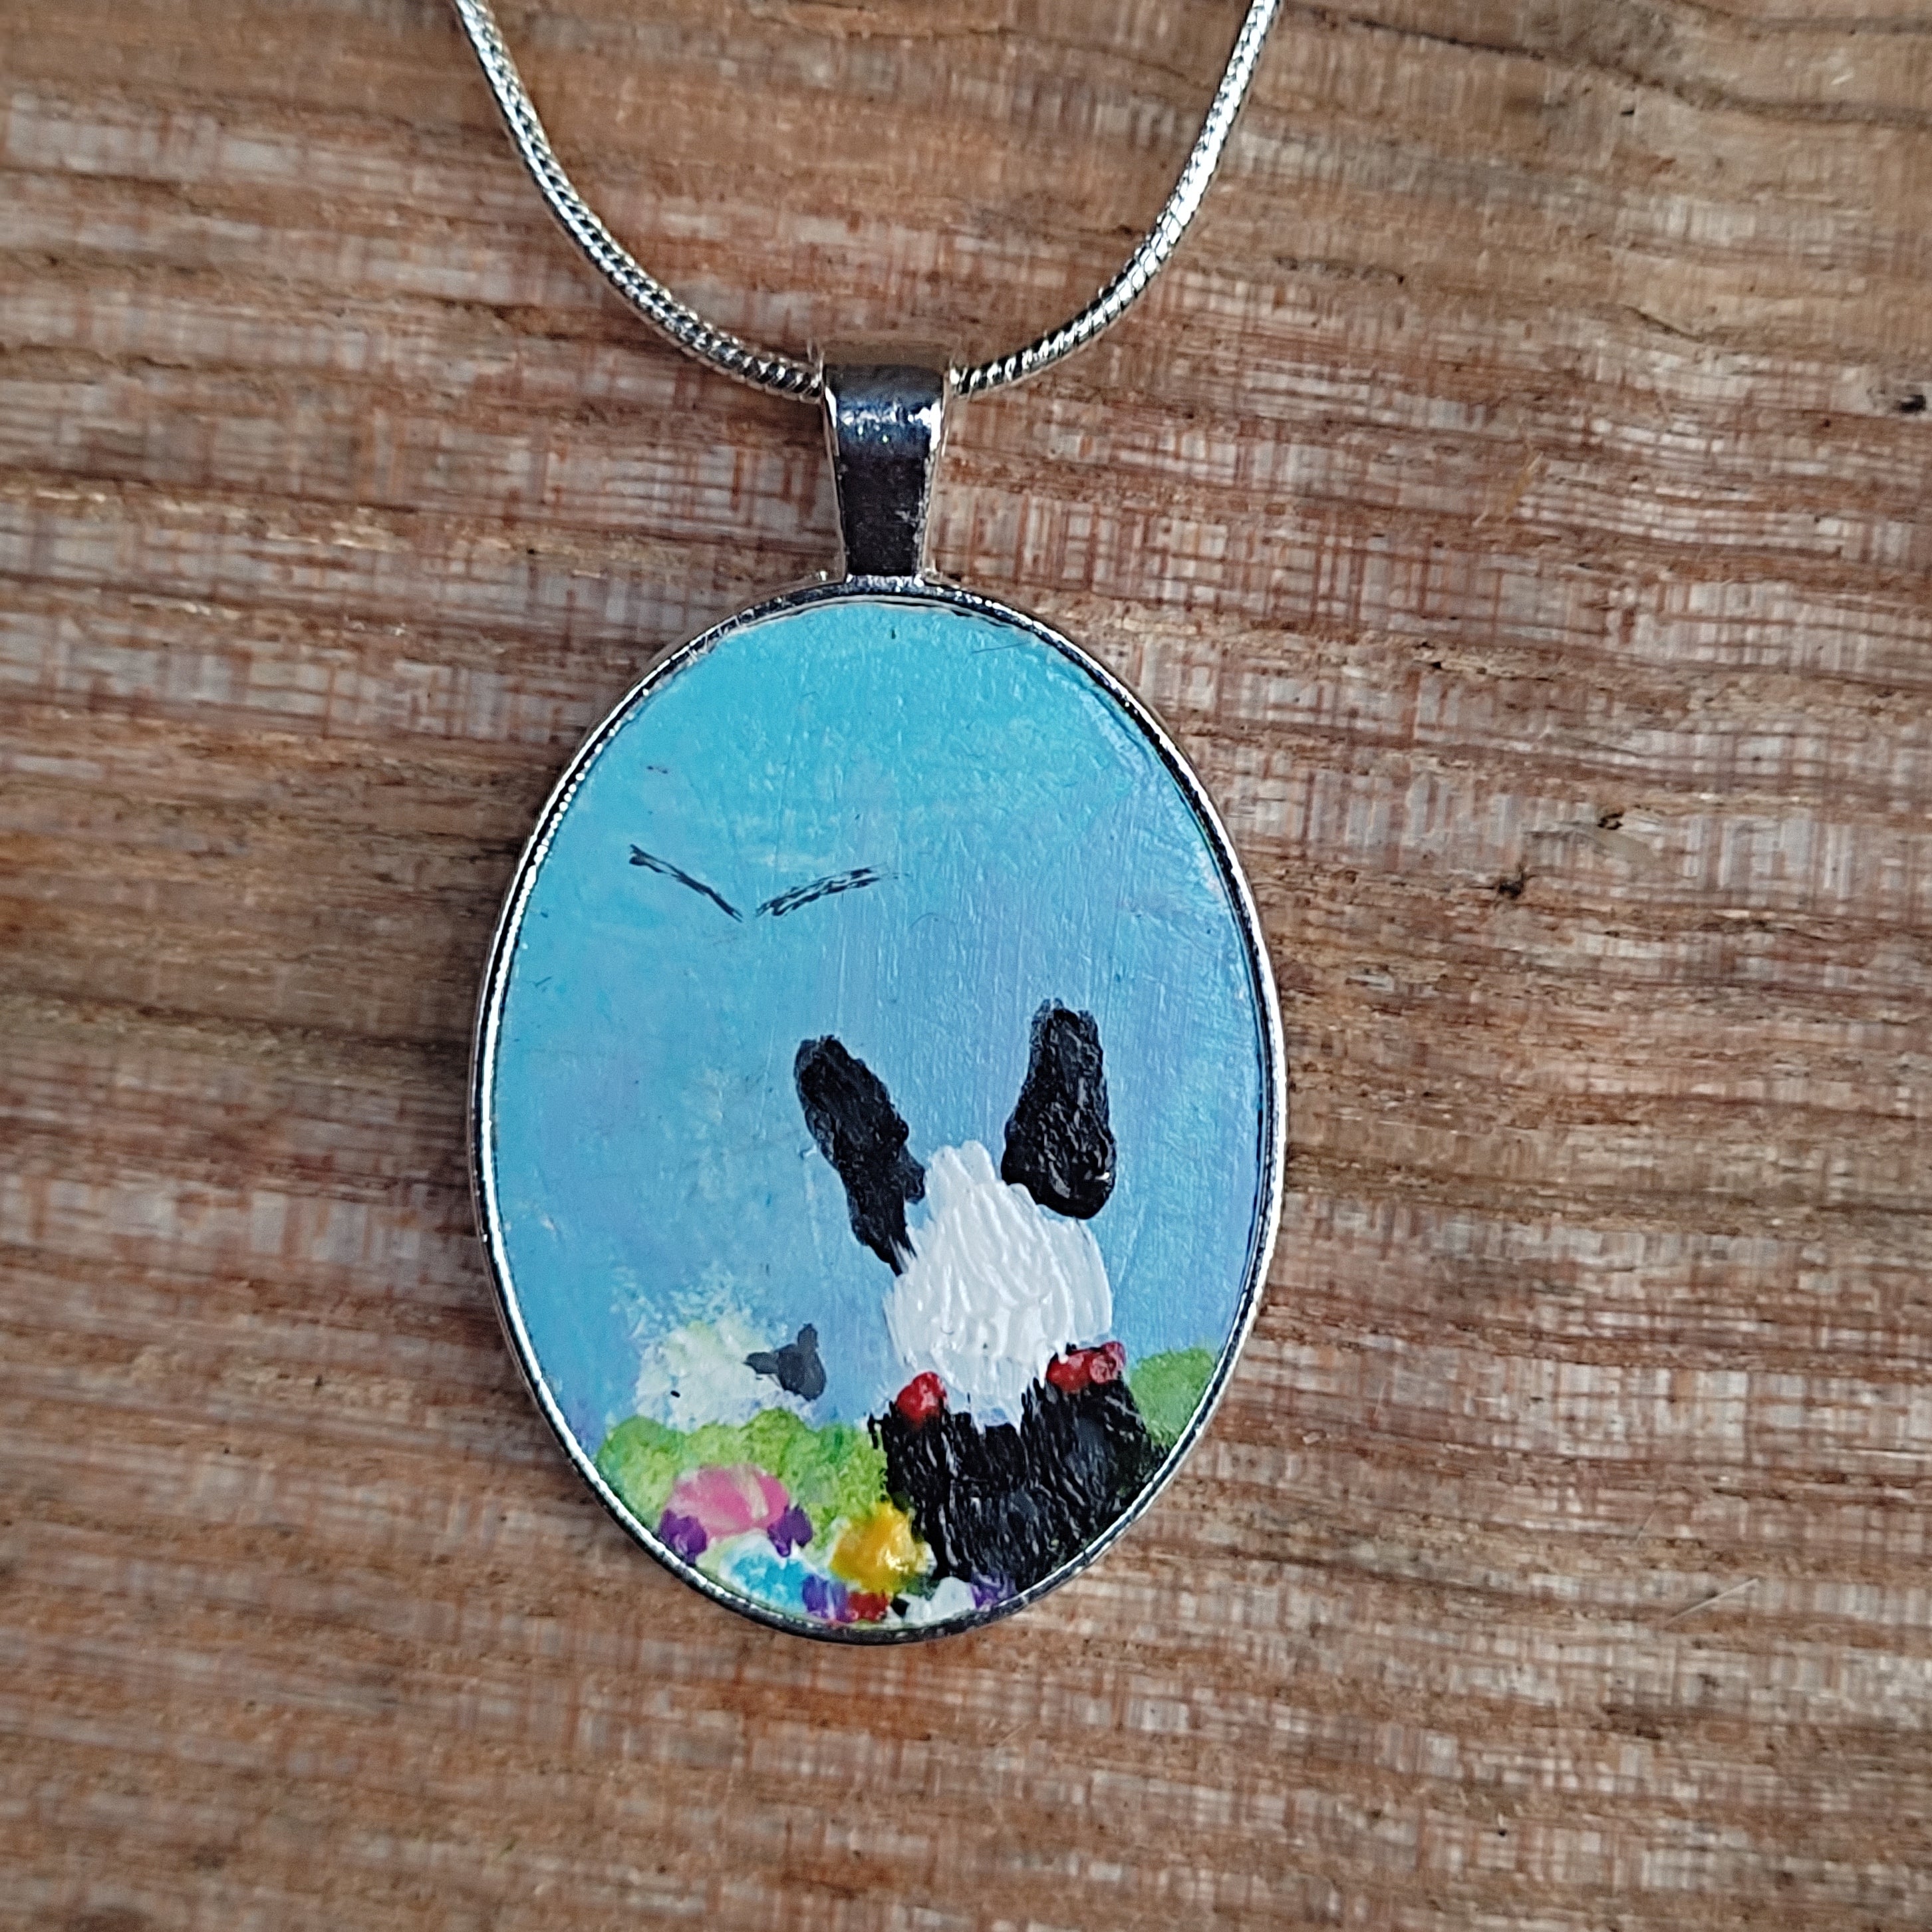 Sally Sheepdog and the Lost Sheep Oval Necklace